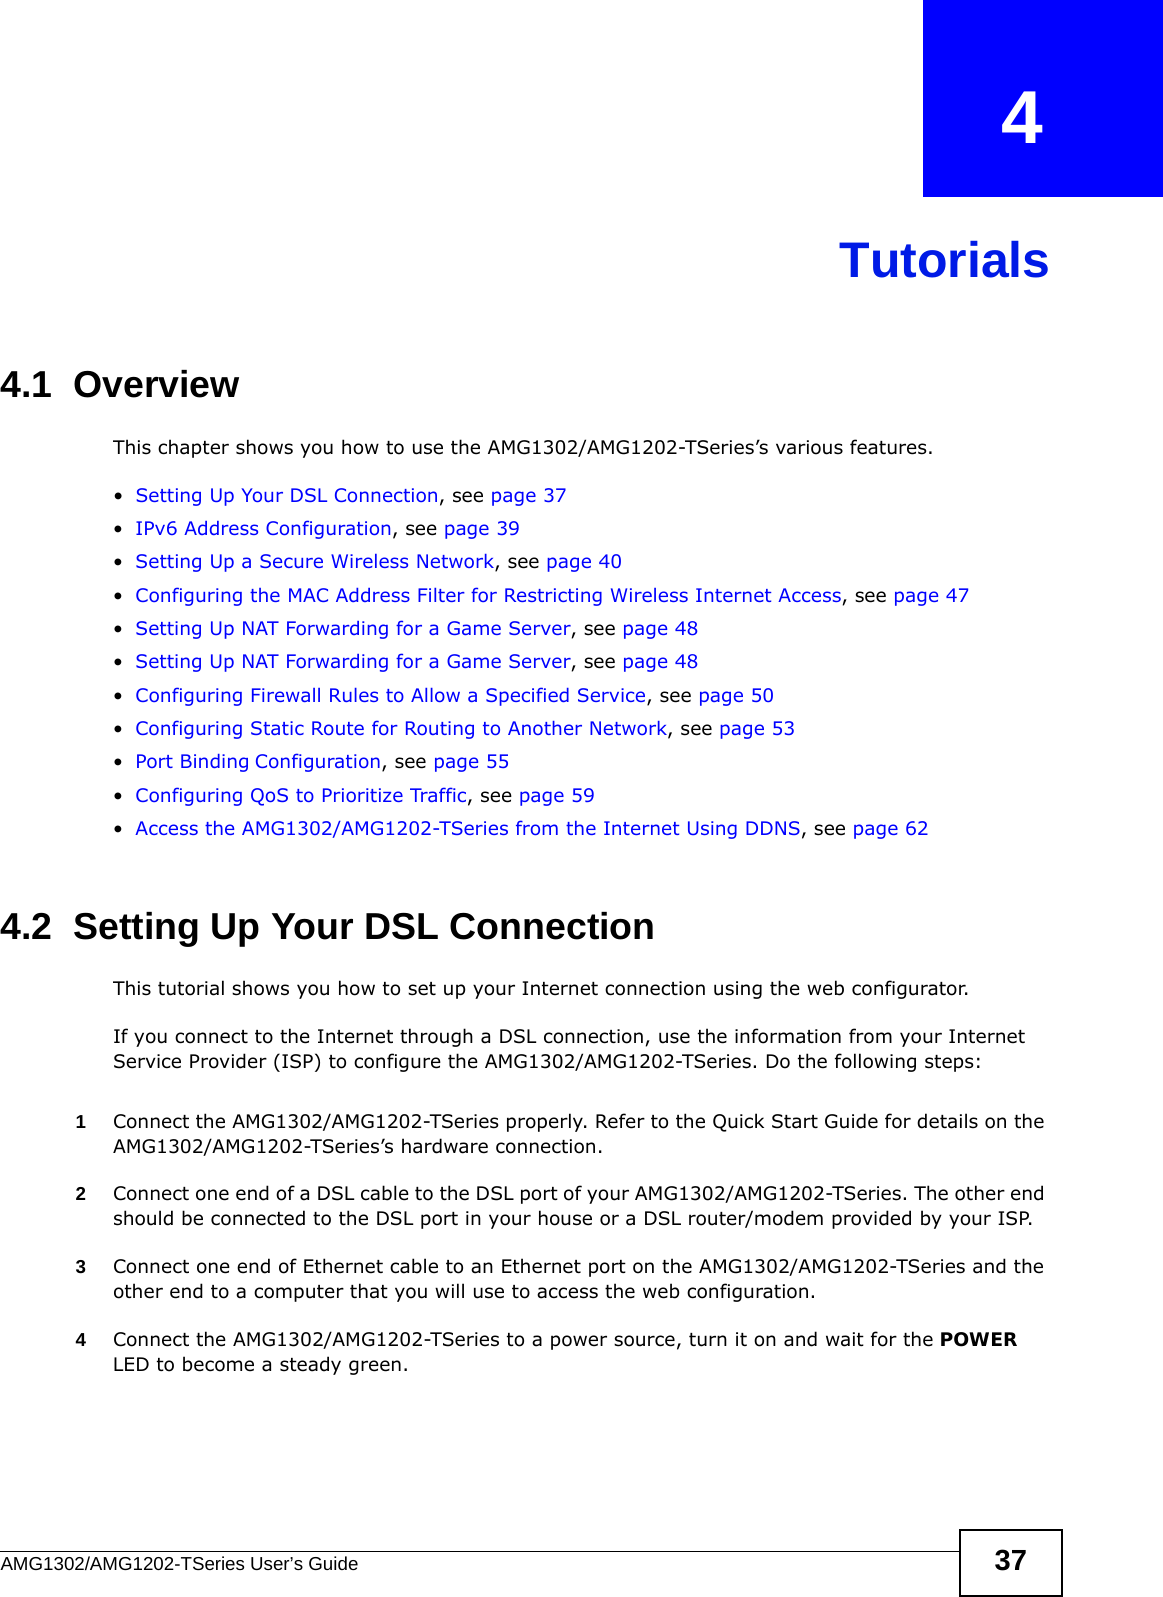 AMG1302/AMG1202-TSeries User’s Guide 37CHAPTER   4Tutorials4.1  OverviewThis chapter shows you how to use the AMG1302/AMG1202-TSeries’s various features.•Setting Up Your DSL Connection, see page 37•IPv6 Address Configuration, see page 39•Setting Up a Secure Wireless Network, see page 40•Configuring the MAC Address Filter for Restricting Wireless Internet Access, see page 47•Setting Up NAT Forwarding for a Game Server, see page 48•Setting Up NAT Forwarding for a Game Server, see page 48•Configuring Firewall Rules to Allow a Specified Service, see page 50•Configuring Static Route for Routing to Another Network, see page 53•Port Binding Configuration, see page 55•Configuring QoS to Prioritize Traffic, see page 59•Access the AMG1302/AMG1202-TSeries from the Internet Using DDNS, see page 624.2  Setting Up Your DSL ConnectionThis tutorial shows you how to set up your Internet connection using the web configurator. If you connect to the Internet through a DSL connection, use the information from your Internet Service Provider (ISP) to configure the AMG1302/AMG1202-TSeries. Do the following steps:1Connect the AMG1302/AMG1202-TSeries properly. Refer to the Quick Start Guide for details on the AMG1302/AMG1202-TSeries’s hardware connection. 2Connect one end of a DSL cable to the DSL port of your AMG1302/AMG1202-TSeries. The other end should be connected to the DSL port in your house or a DSL router/modem provided by your ISP.3Connect one end of Ethernet cable to an Ethernet port on the AMG1302/AMG1202-TSeries and the other end to a computer that you will use to access the web configuration.4Connect the AMG1302/AMG1202-TSeries to a power source, turn it on and wait for the POWER LED to become a steady green.